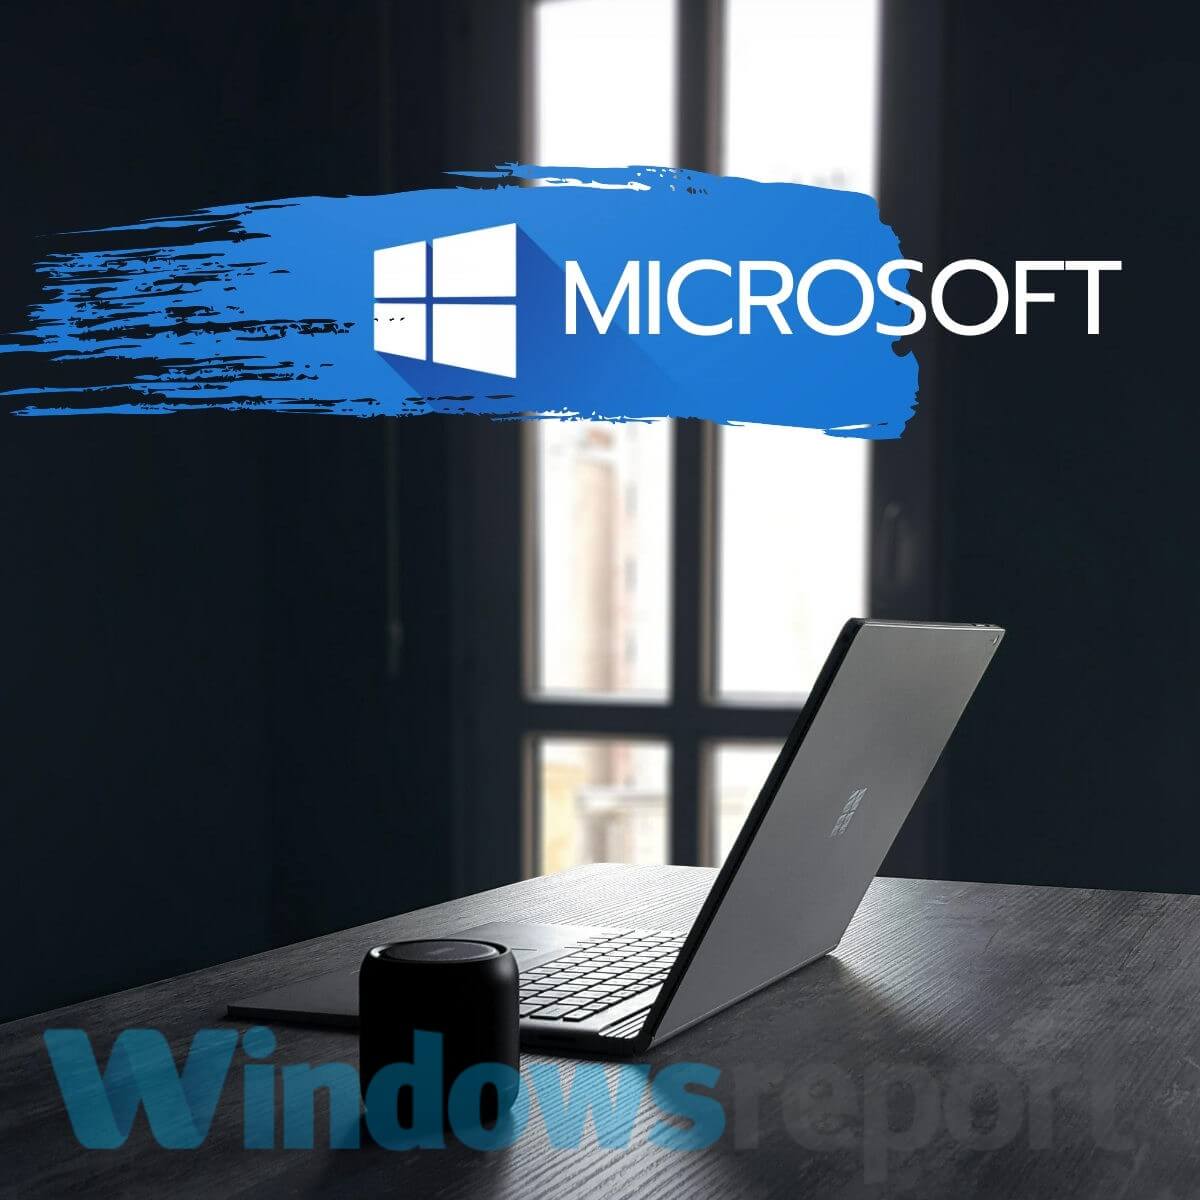 Windows server does not allow clipboard redirection - laptop on table